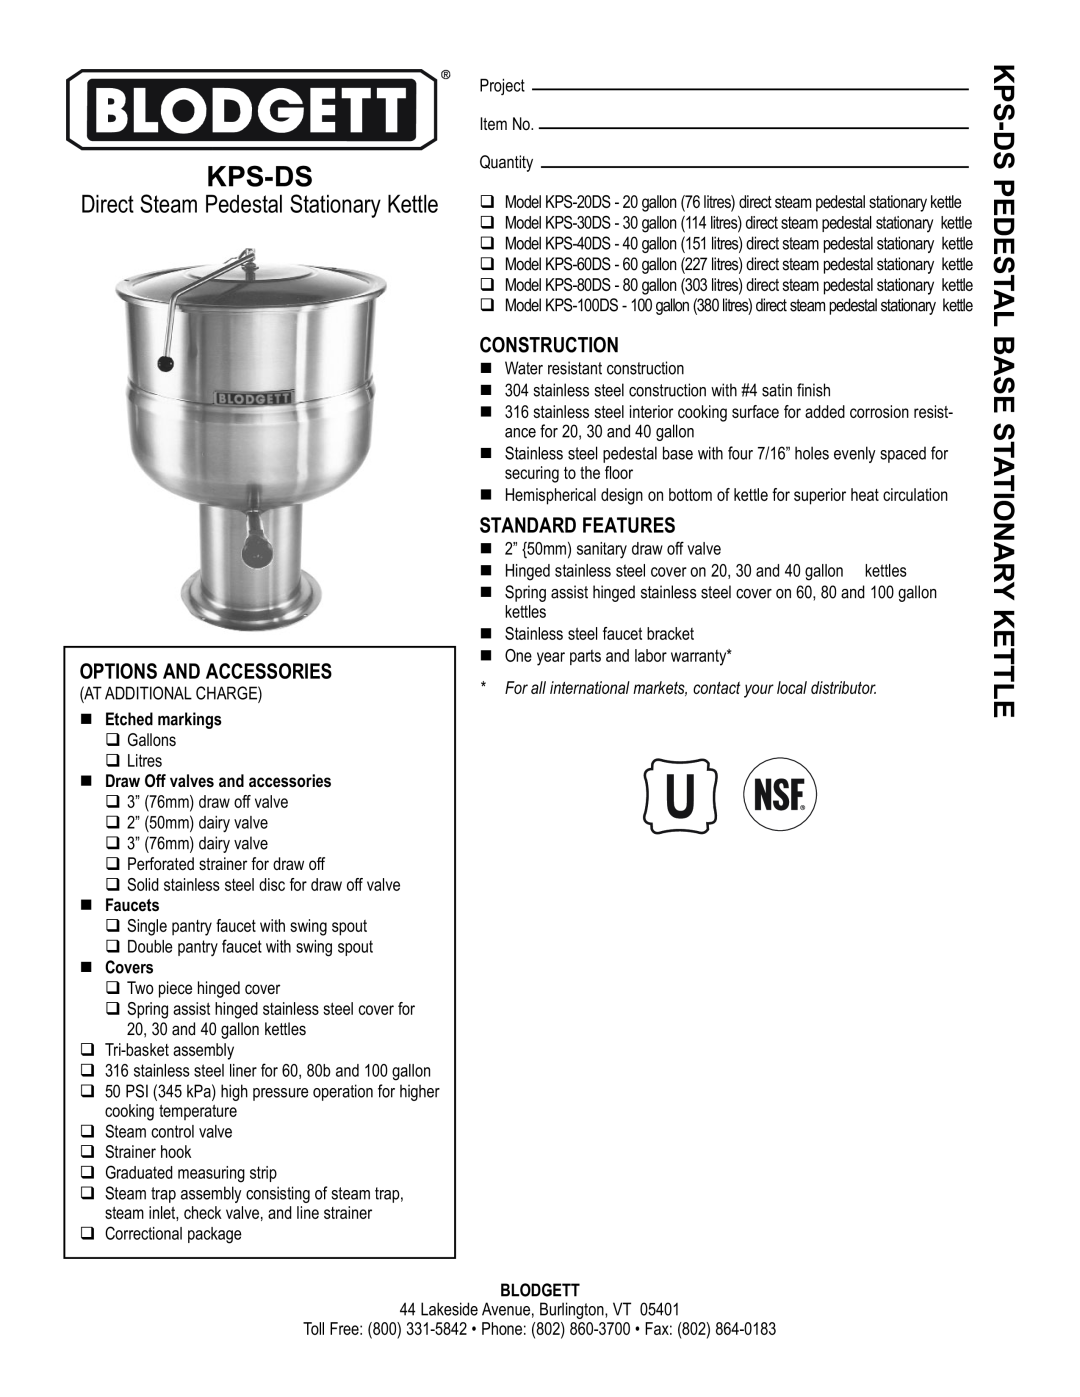 Blodgett KPS-DS warranty Kps-Dspedestal Base Stationary Kettle, Options And Accessories, Construction, Etched markings 